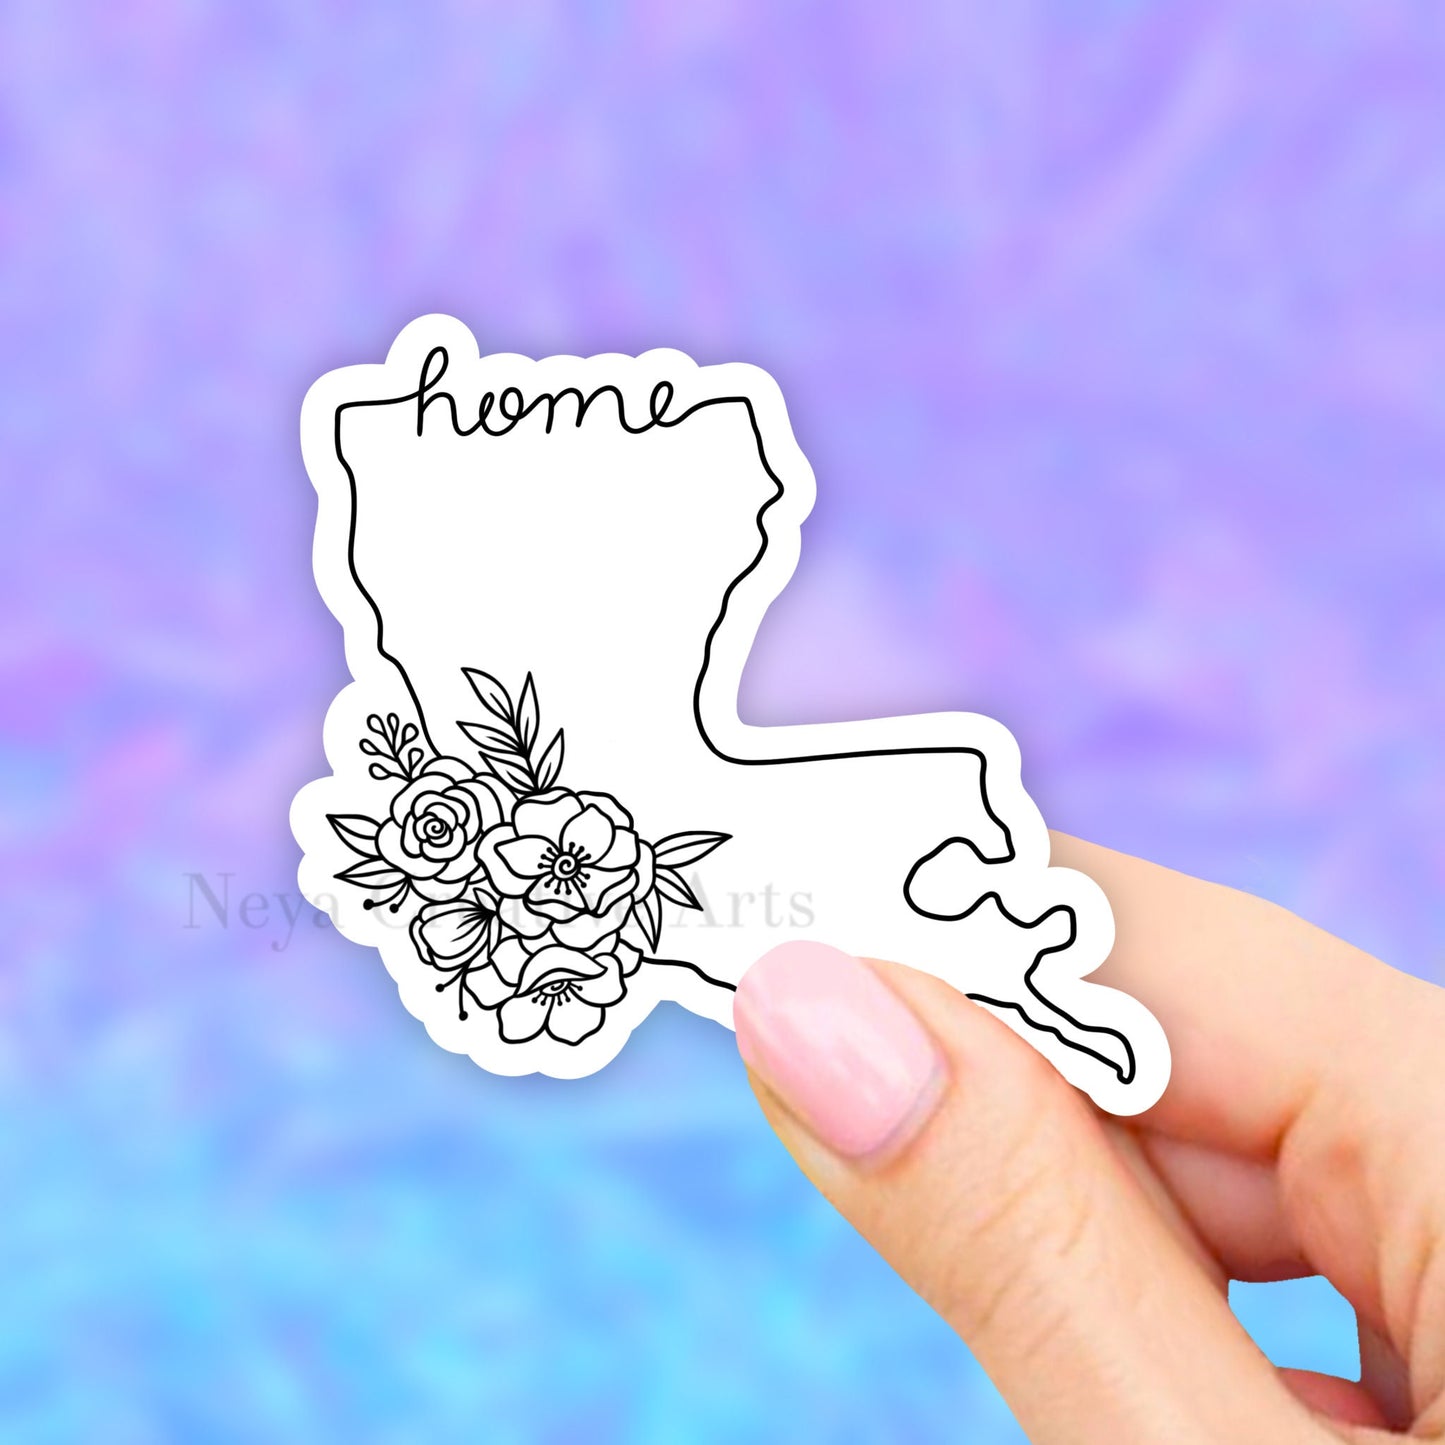 Louisiana State Sticker, Floral States Map, water bottle stickers, state stickers, USA State Art, USA Map Car Decal, Laptop, waterproof